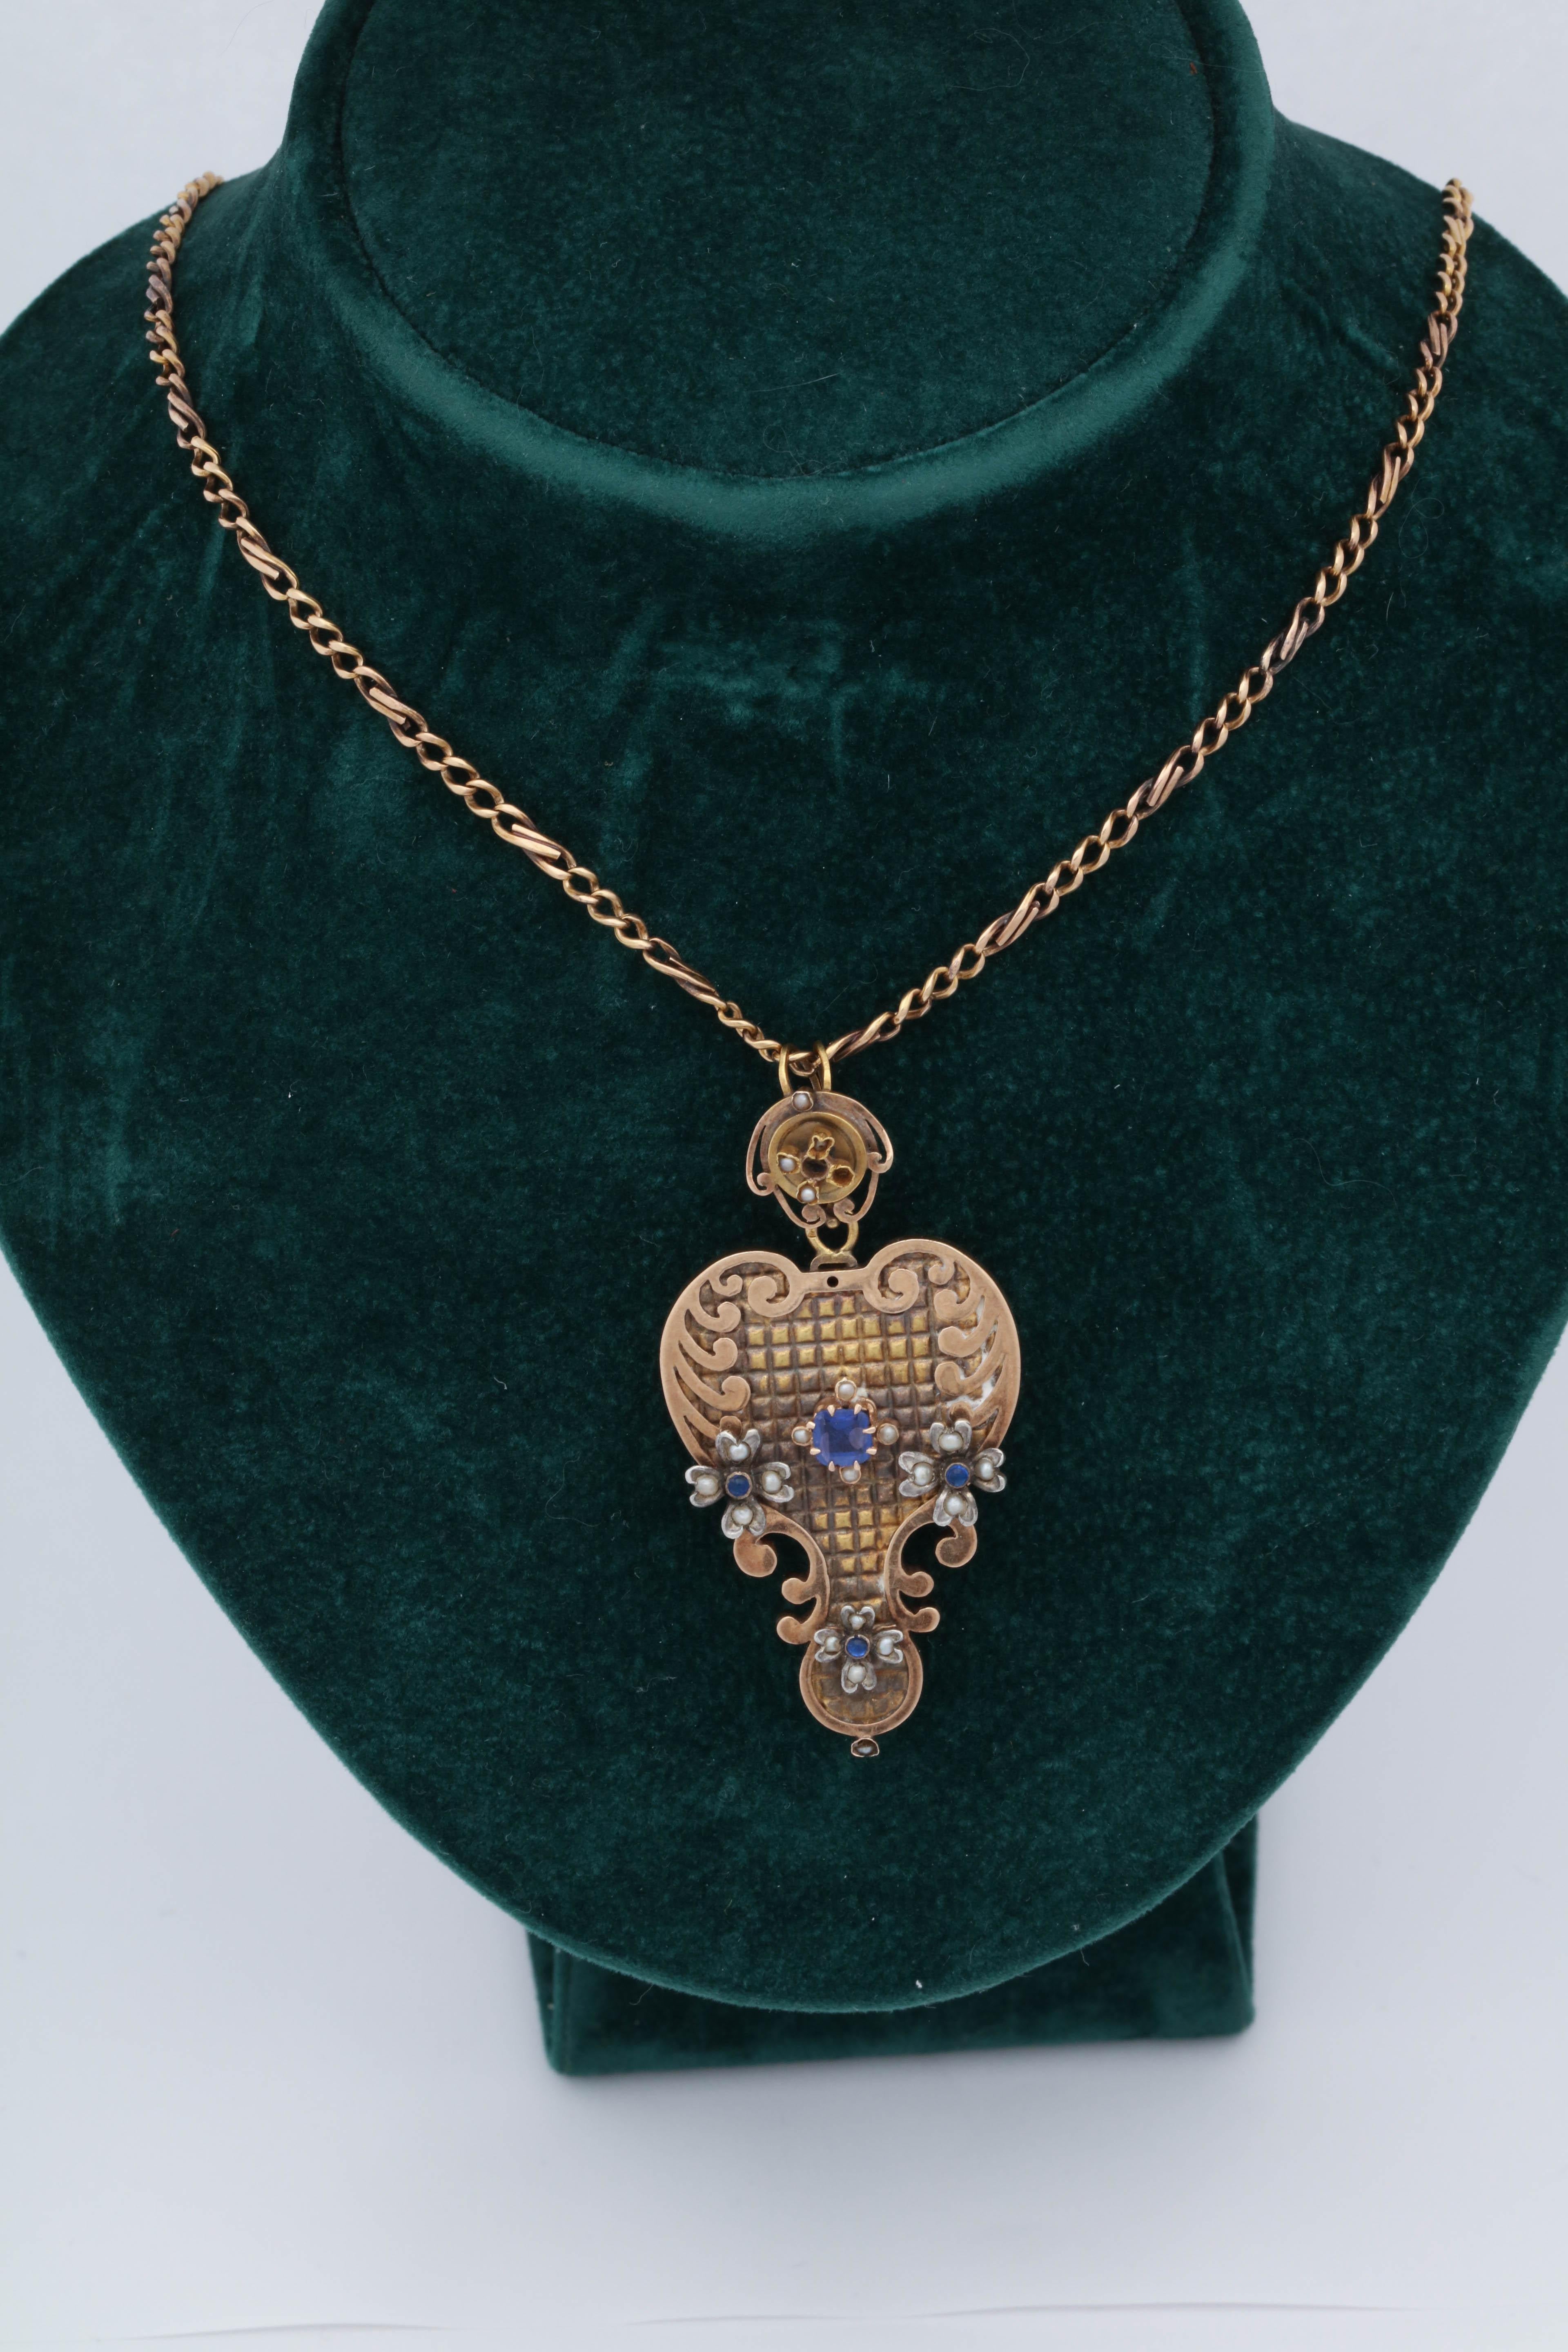 One LadiesAntique Victorian Era 18kt Rose Gold Heart Shaped Handmade And Hand Engraved Locket Embellished With One Square Cut Sapphire Weighing Approximately .50ct. Also Designed With [3] Cabochon Sapphires Weighing Approximately.10 Pts Total